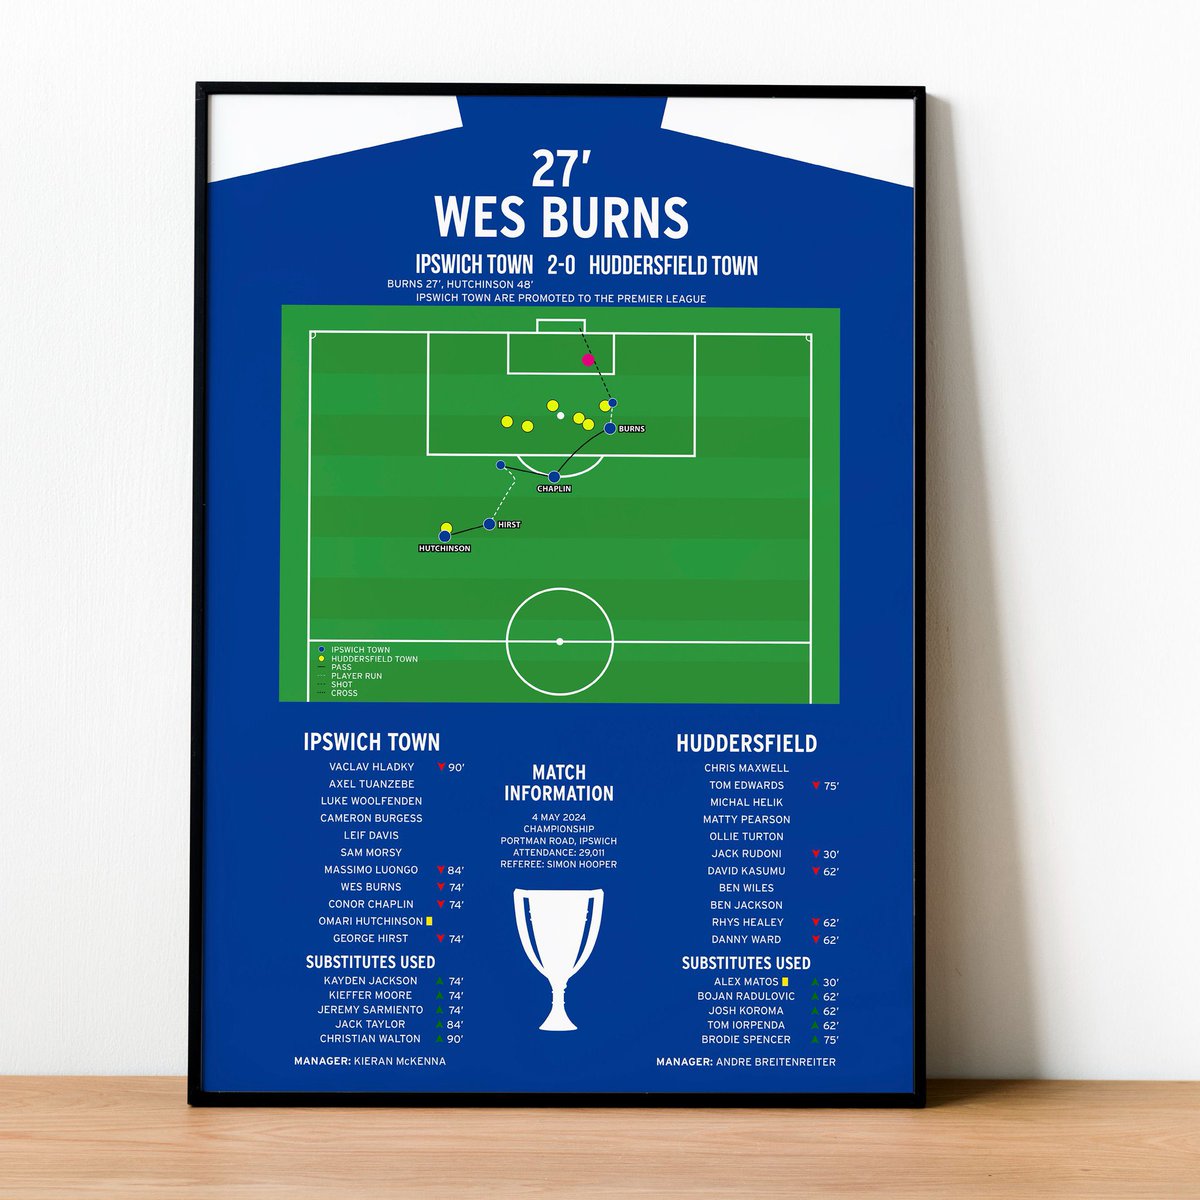 🙌 #ITFC PROMOTION PRINTS GIVEAWAY!! 🗣️ We've teamed up with @Sporting_Prints to give away a 23/24 season print and Wes Burns' goal against Huddersfield! 🚜 To enter: ➡️ Follow us and @Sporting_Prints 🔄 Retweet this post 🤞 The winner will be announced next week!